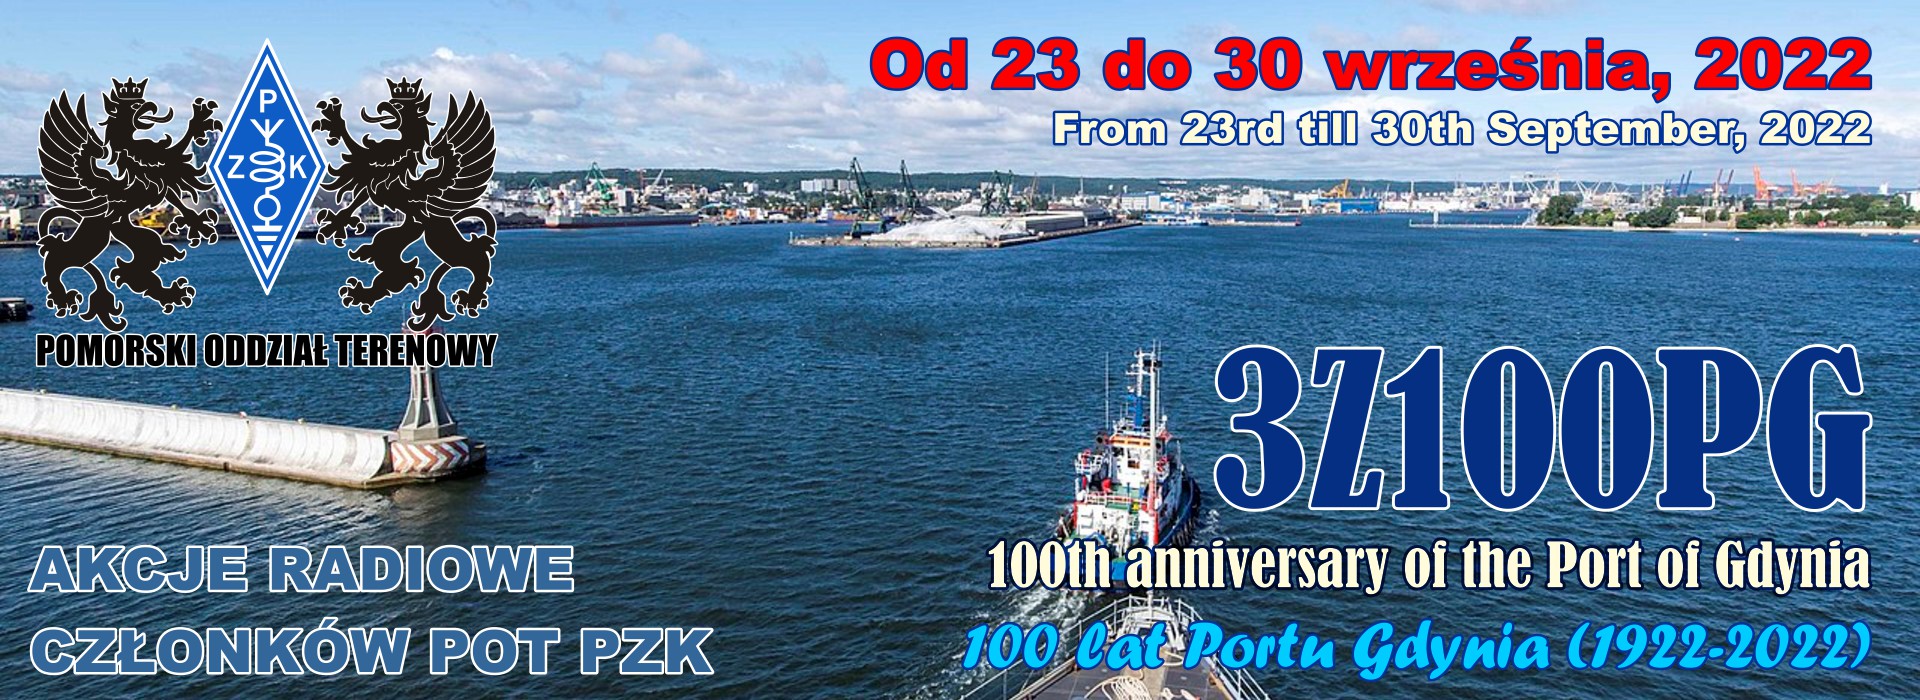 The 100 anniversary of the Port of Gdynia (1922-2022)